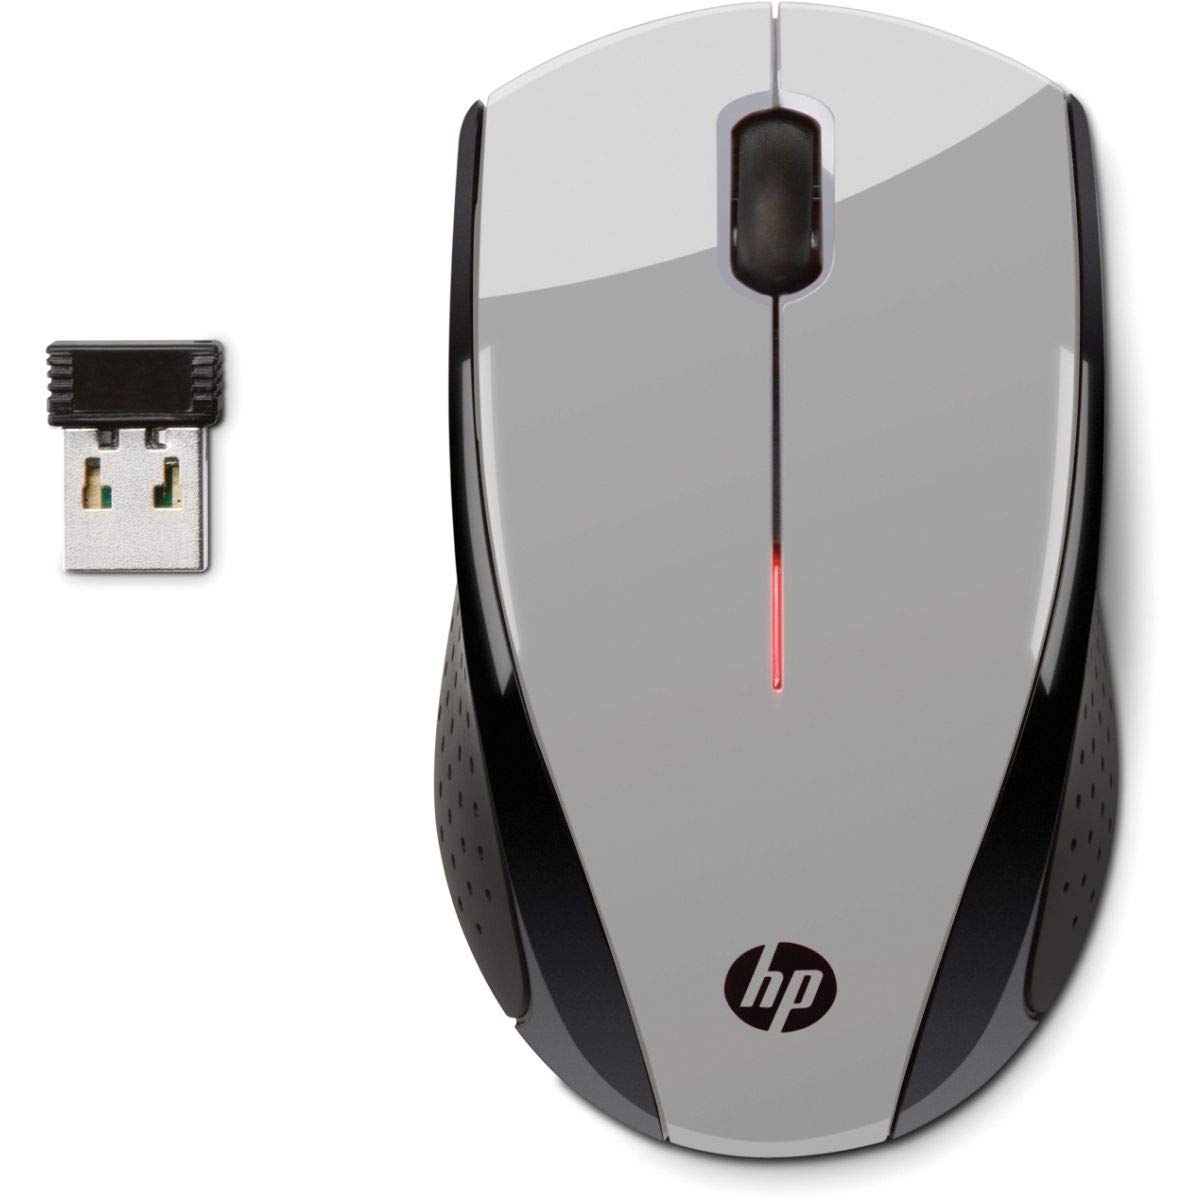 HP X3000 Wireless Optical Mouse with 1600DPI and 2.4GHz Connectivity From TPS Technologies